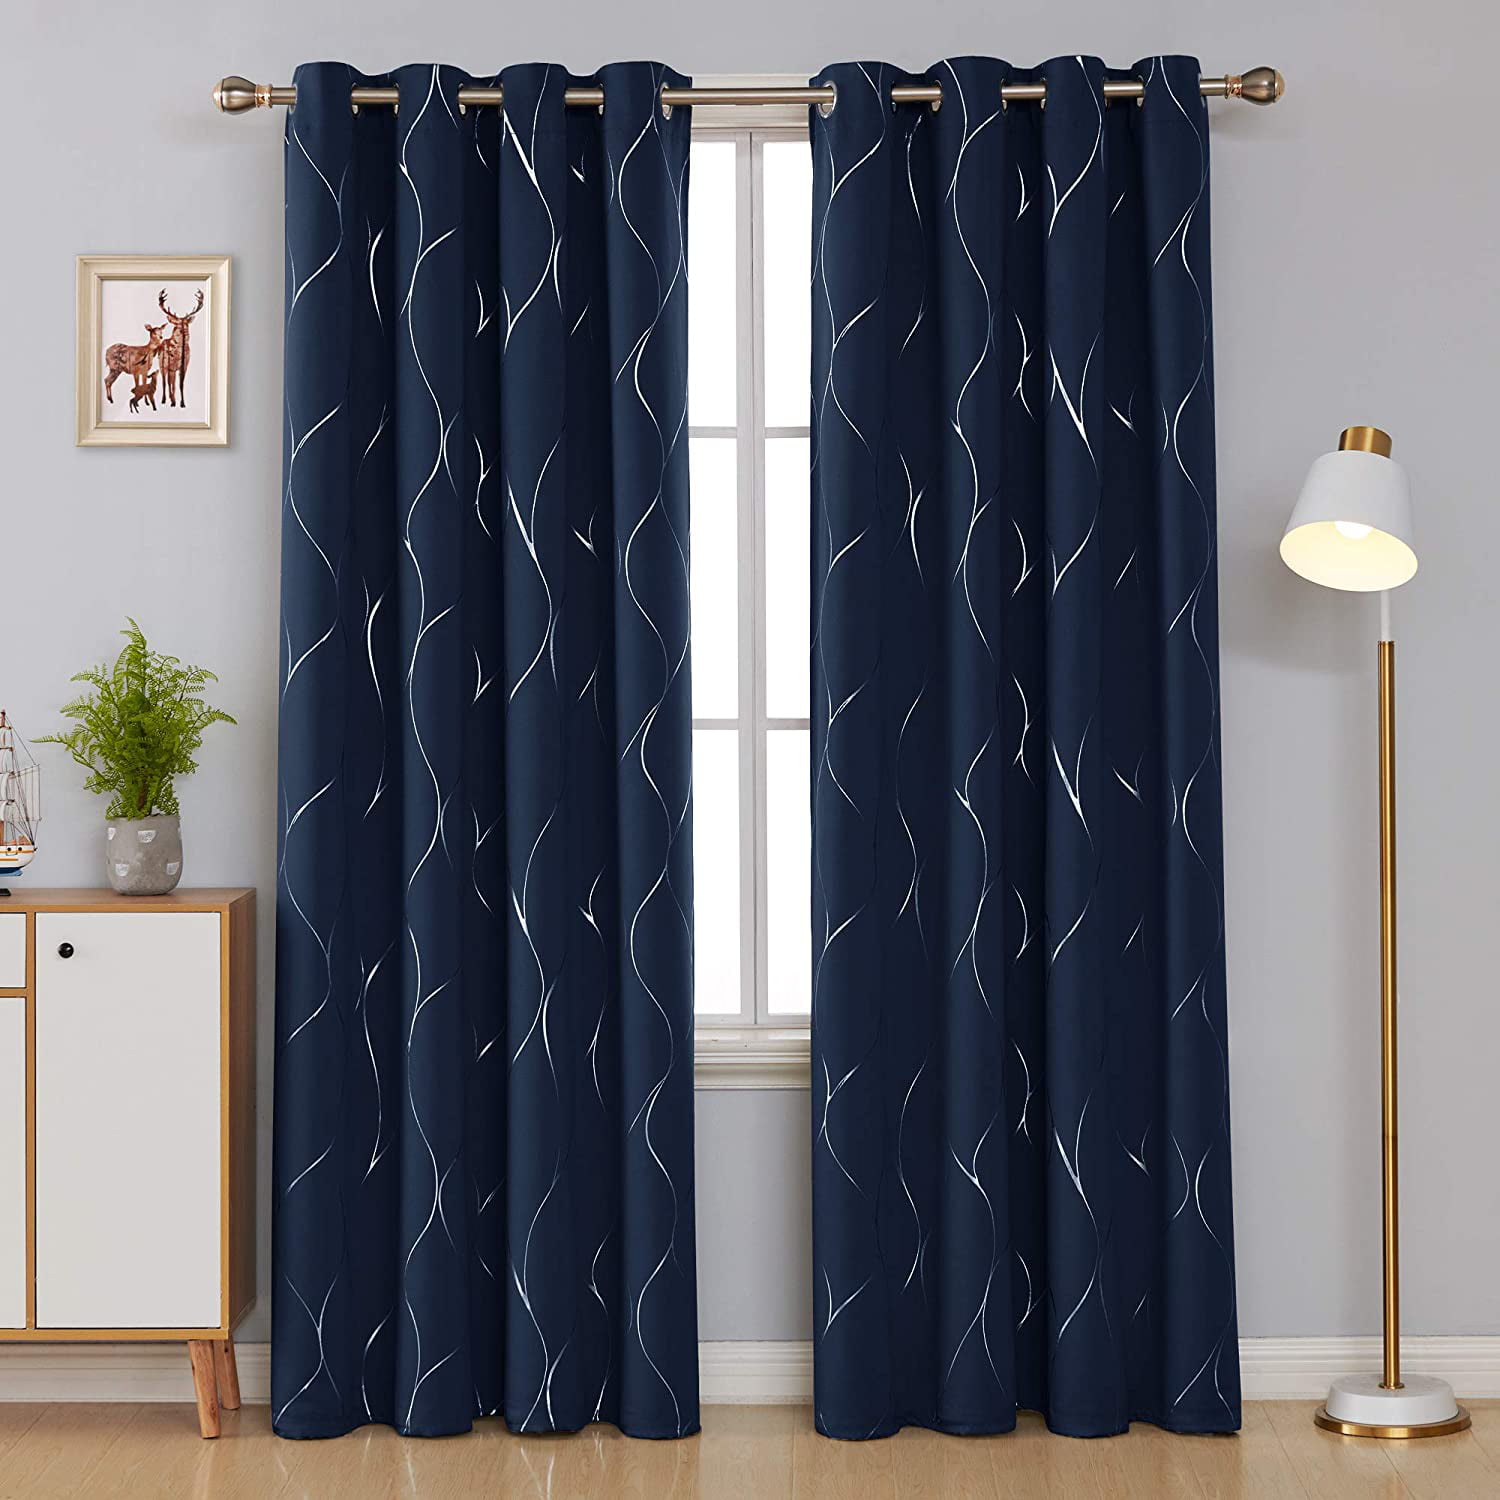 Details about   Printed Moroccan Blackout Curtains for Kids Room Eyelet Thermal Insulated New 